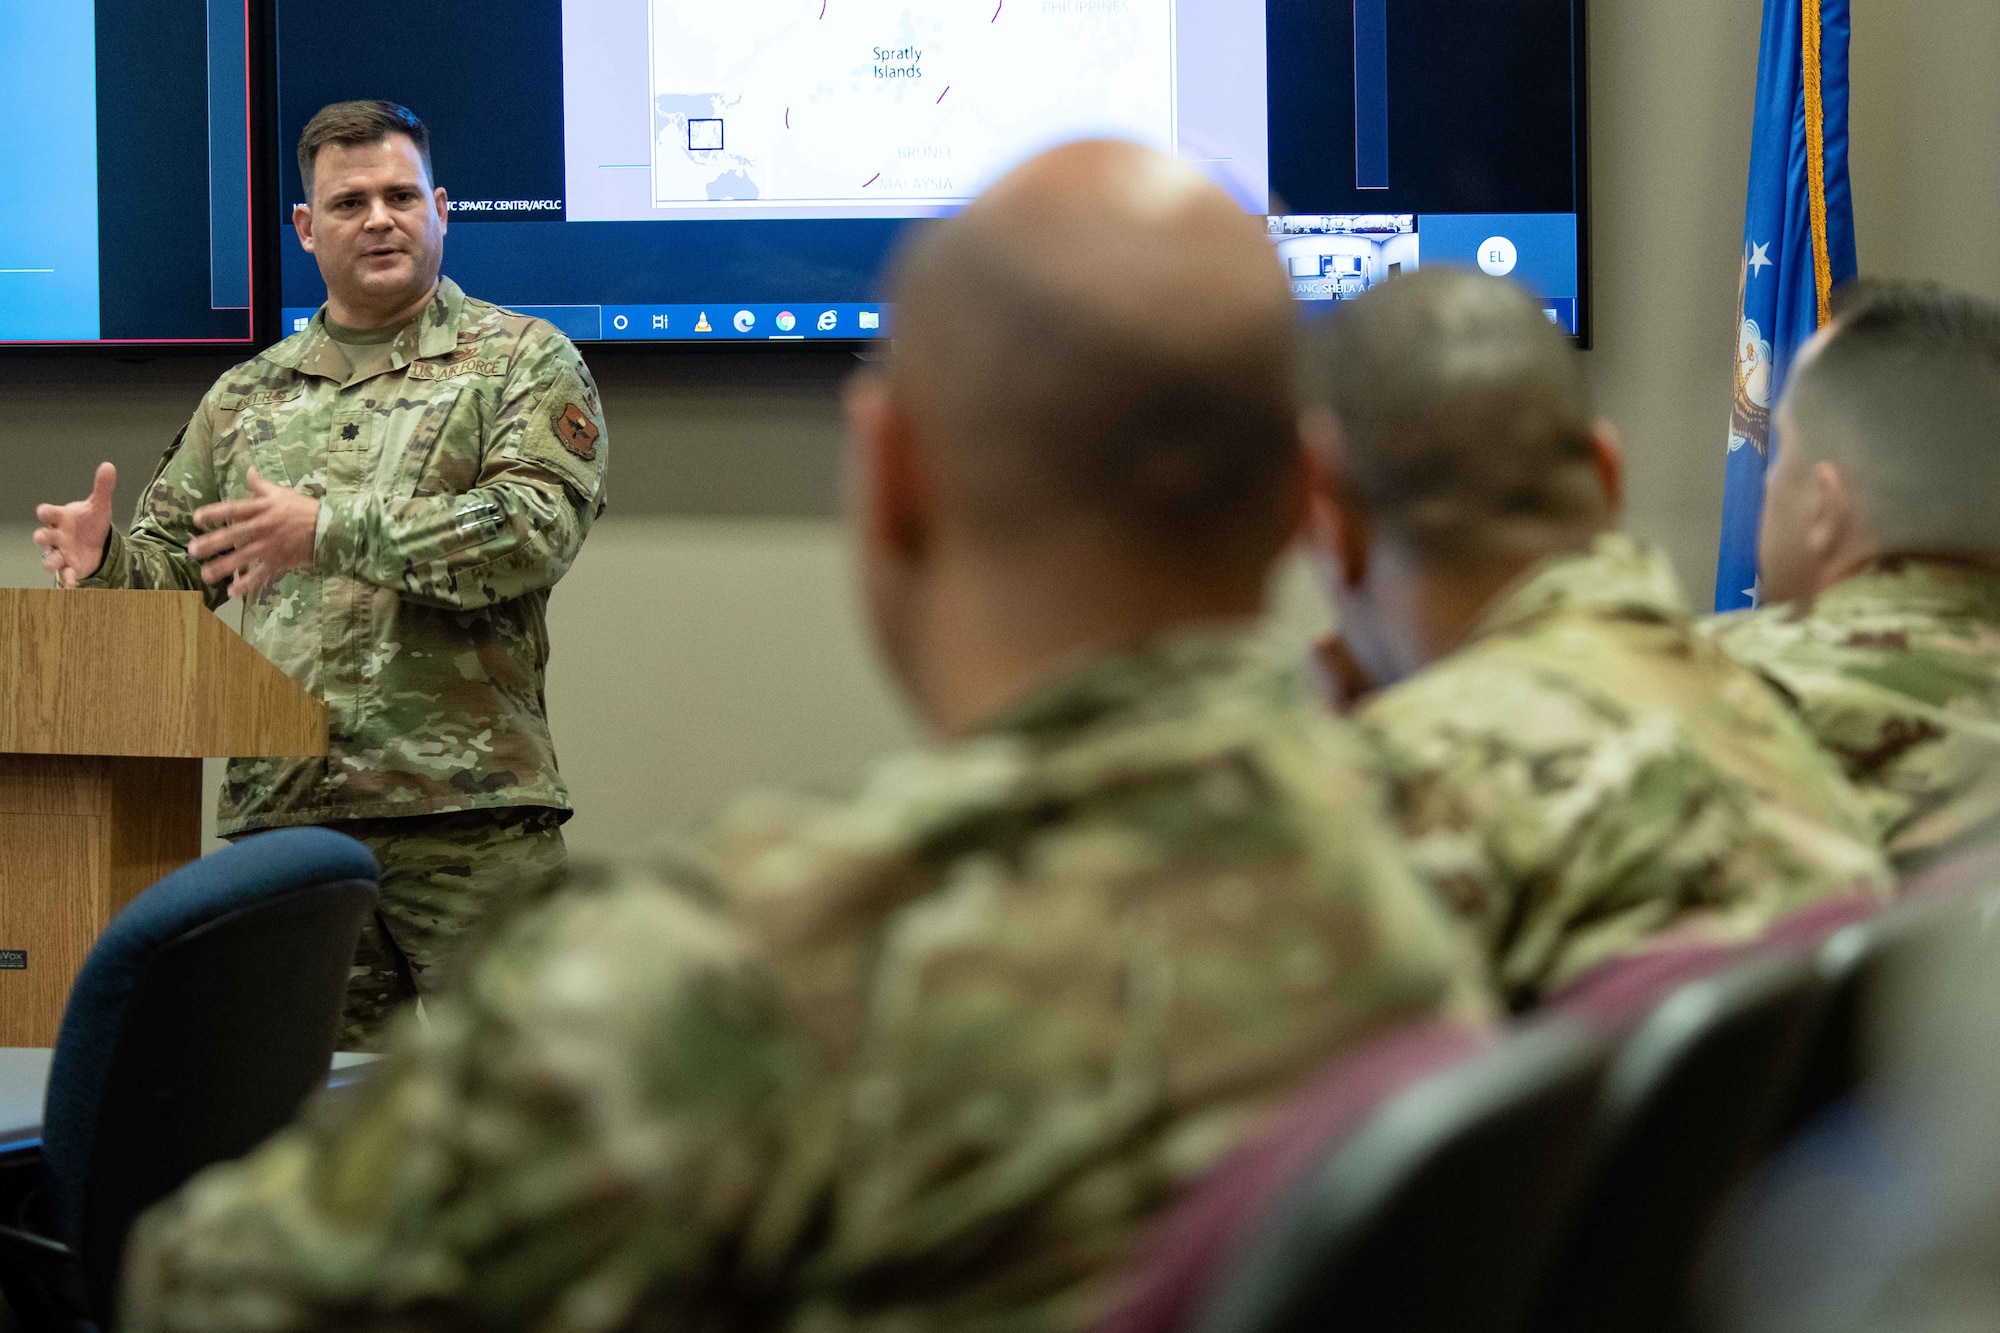 Lieutenant Col. Justin Settles, deputy director, China Aerospace Studies Institute, presents a lecture at the China ‘Belt and Road Initiative’ training event June 8, 2021, at the Air University Teaching and Learning Center, Maxwell Air Force Base, Alabama.